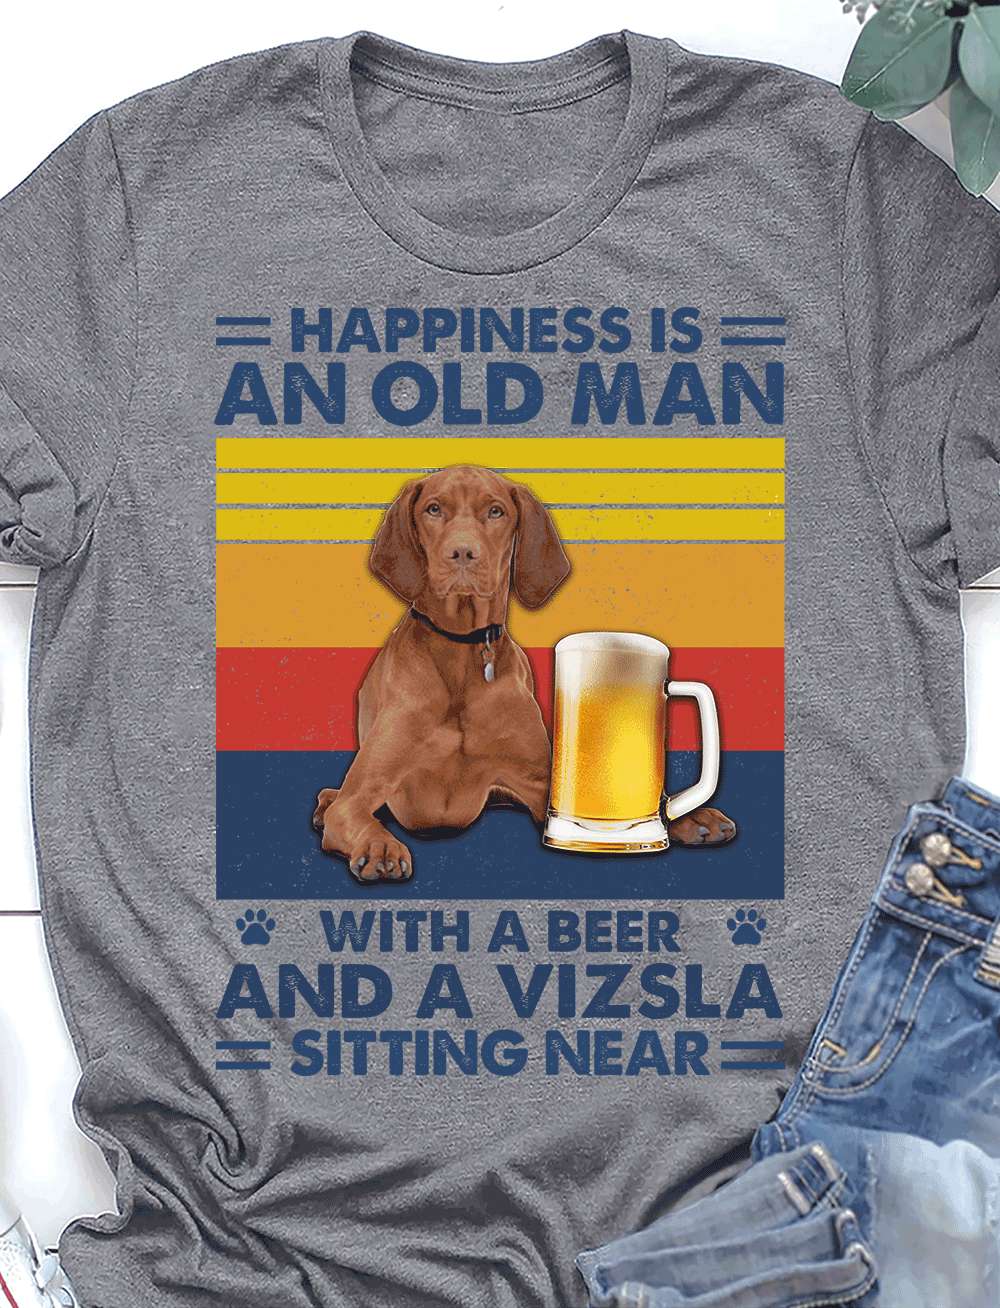 Vizsla Beer - Happiness is an old man with a beer and a vizsla sitting near